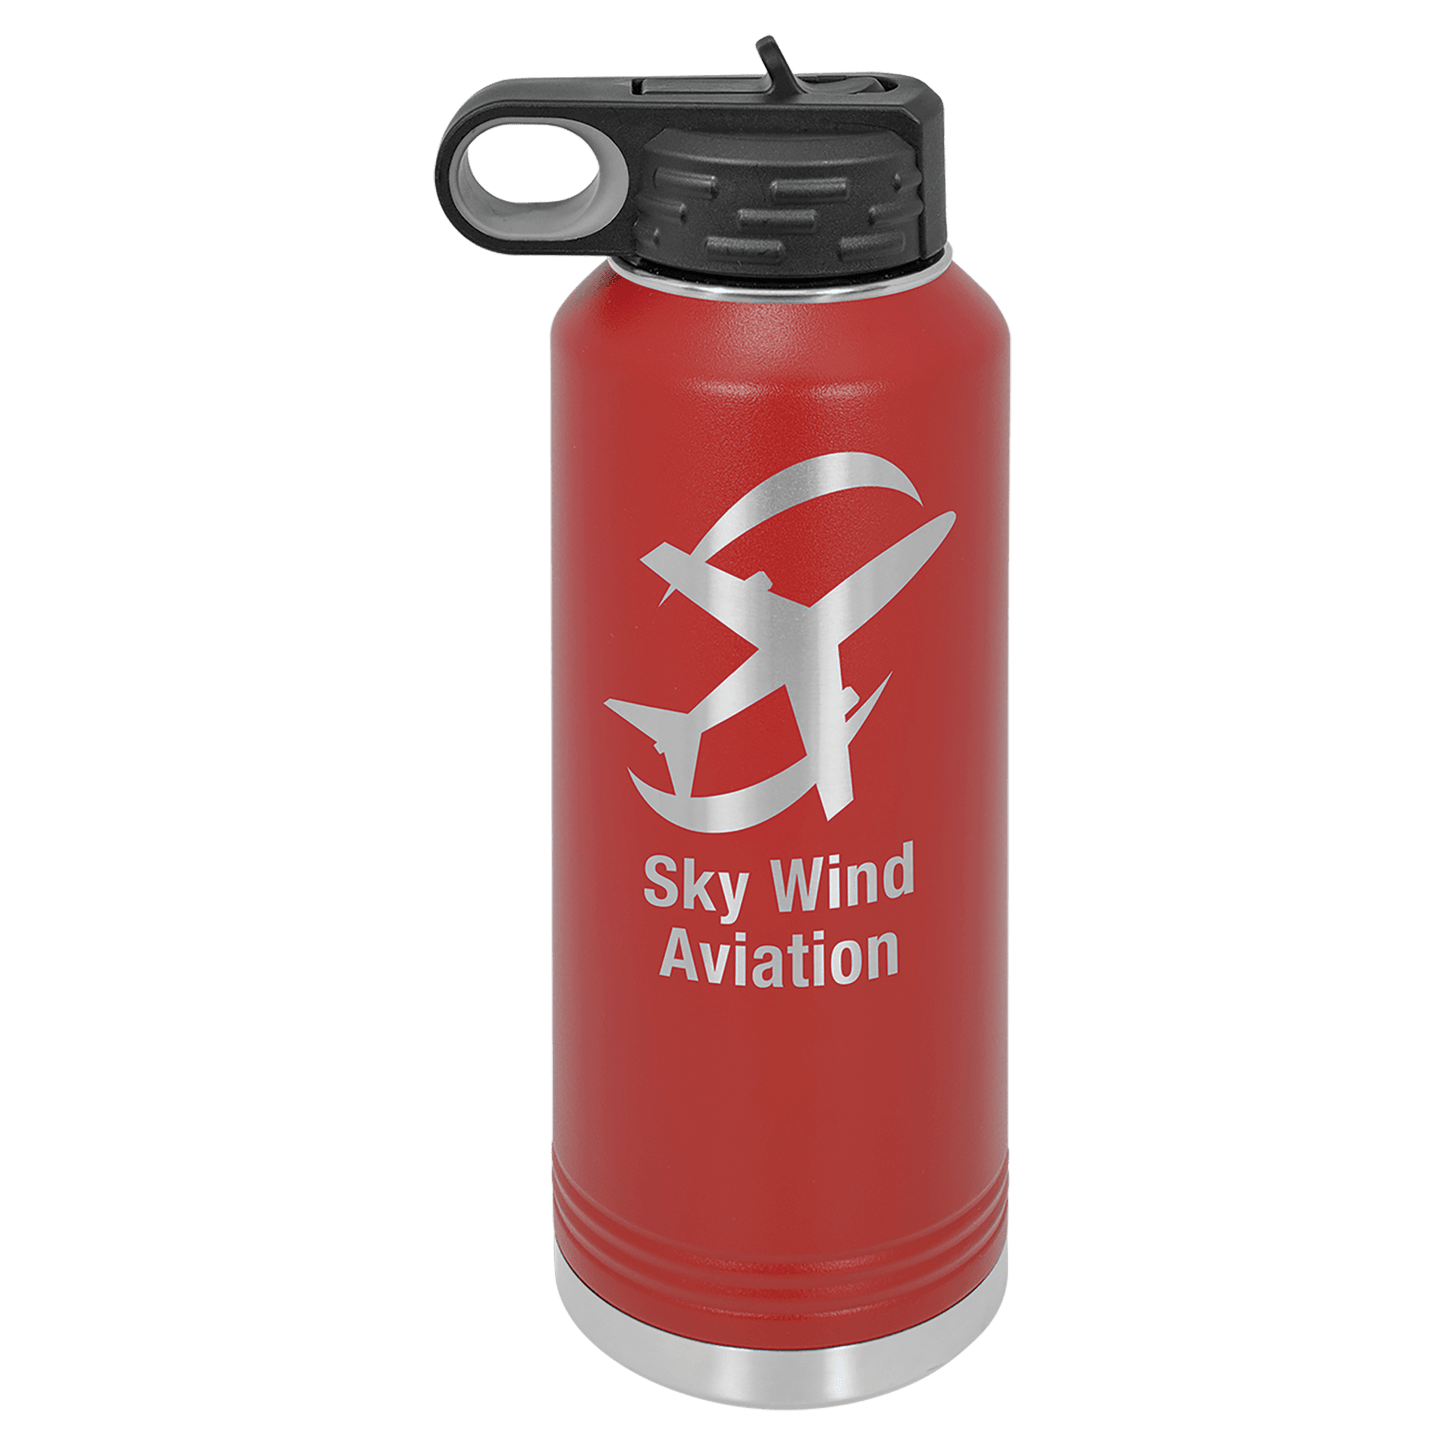 Laser Engraved Insulated Water Bottle 40 oz